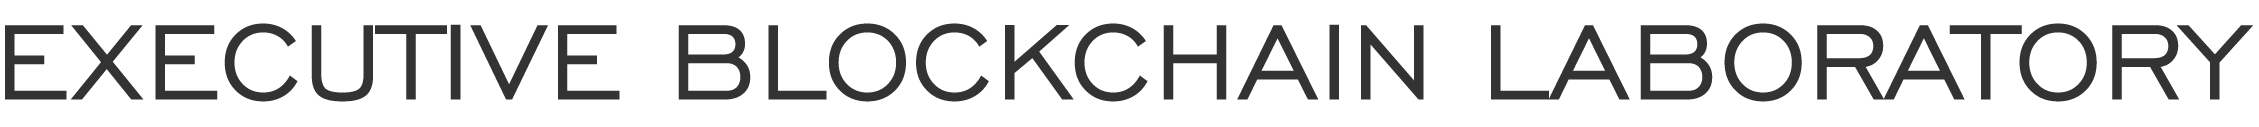 Logo EXCLAB - Title